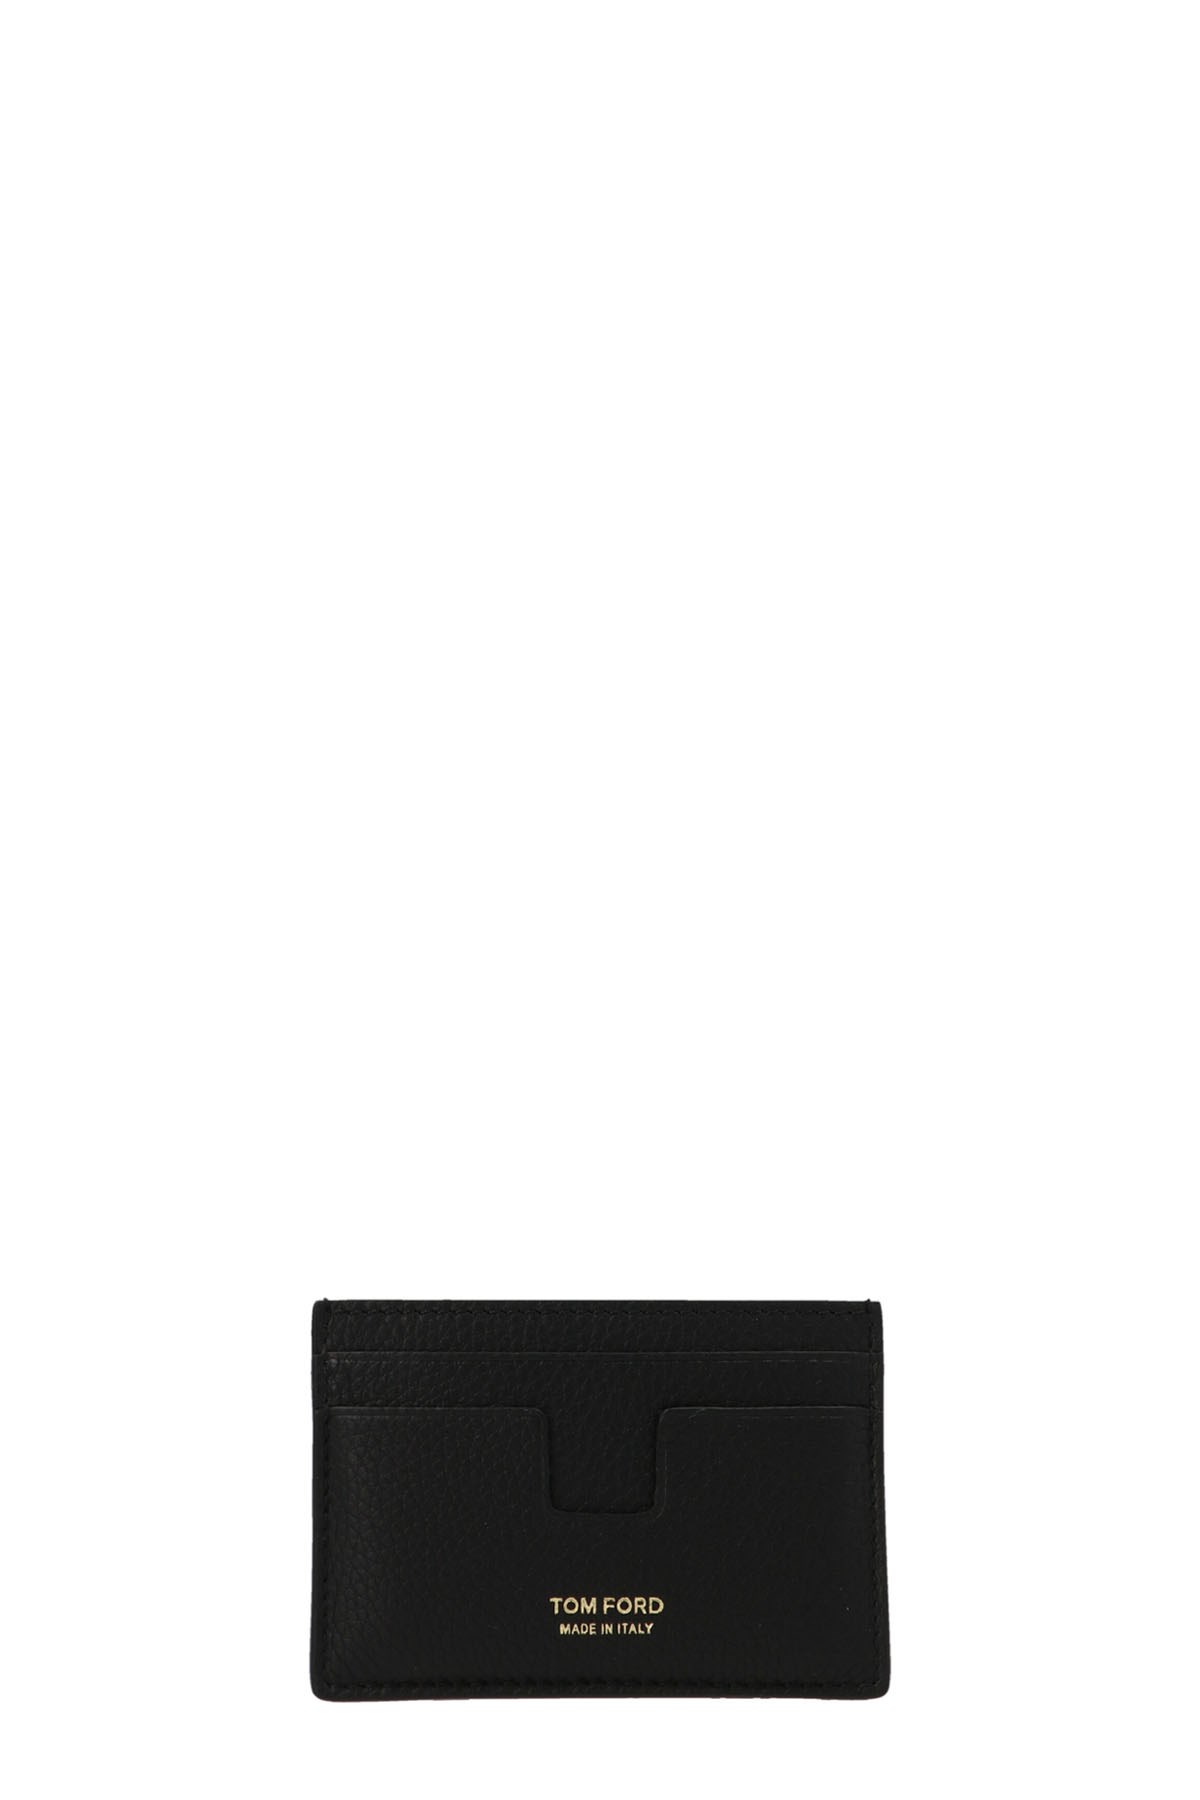 TOM FORD 'T Line Classic’ Card Holder